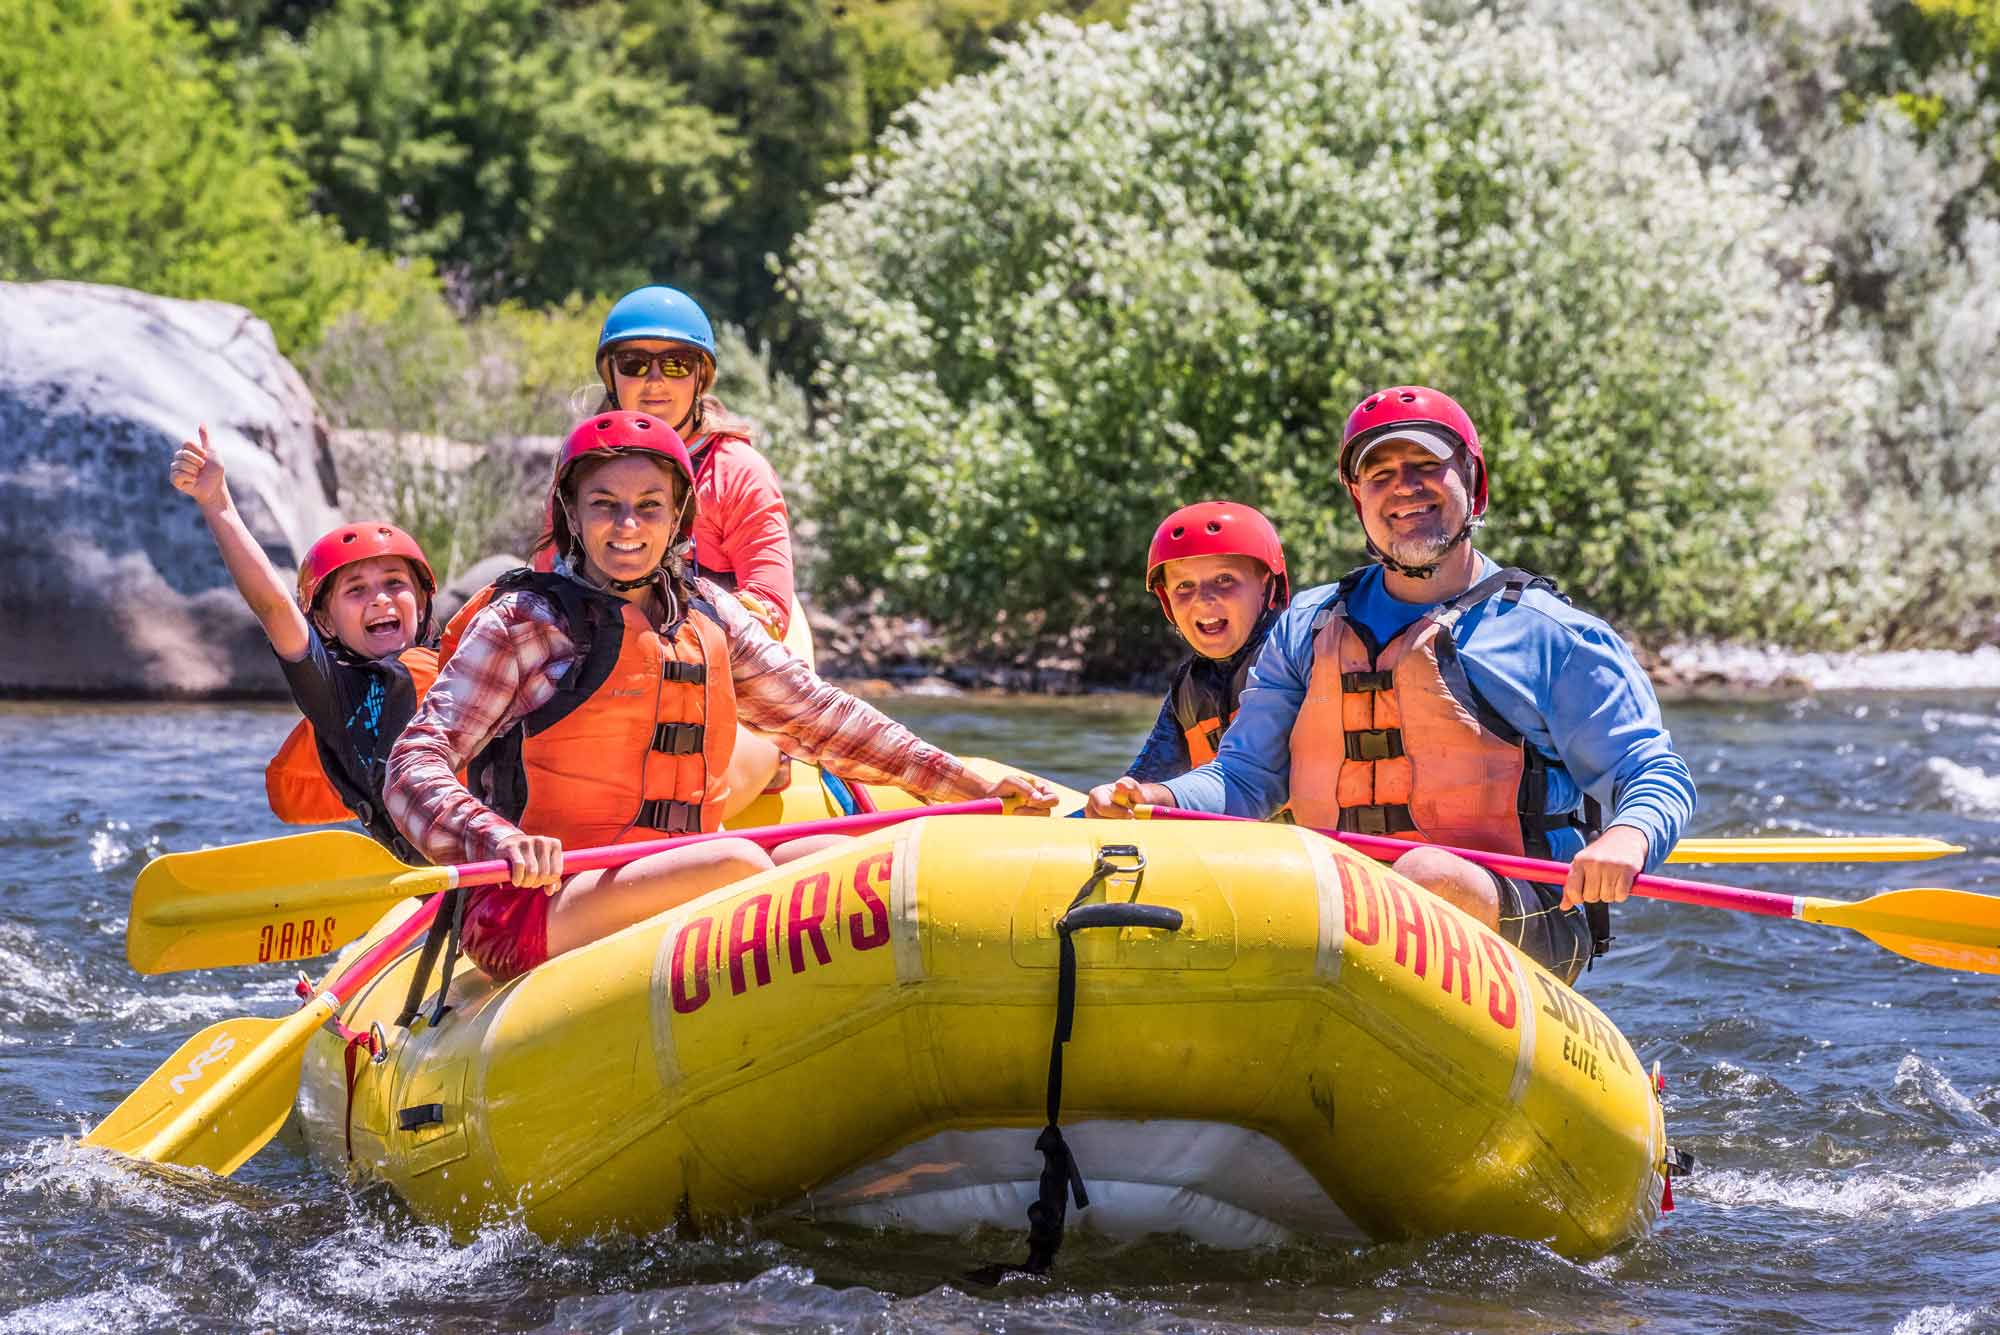 A family on a whitewater rafting trip on California's American River